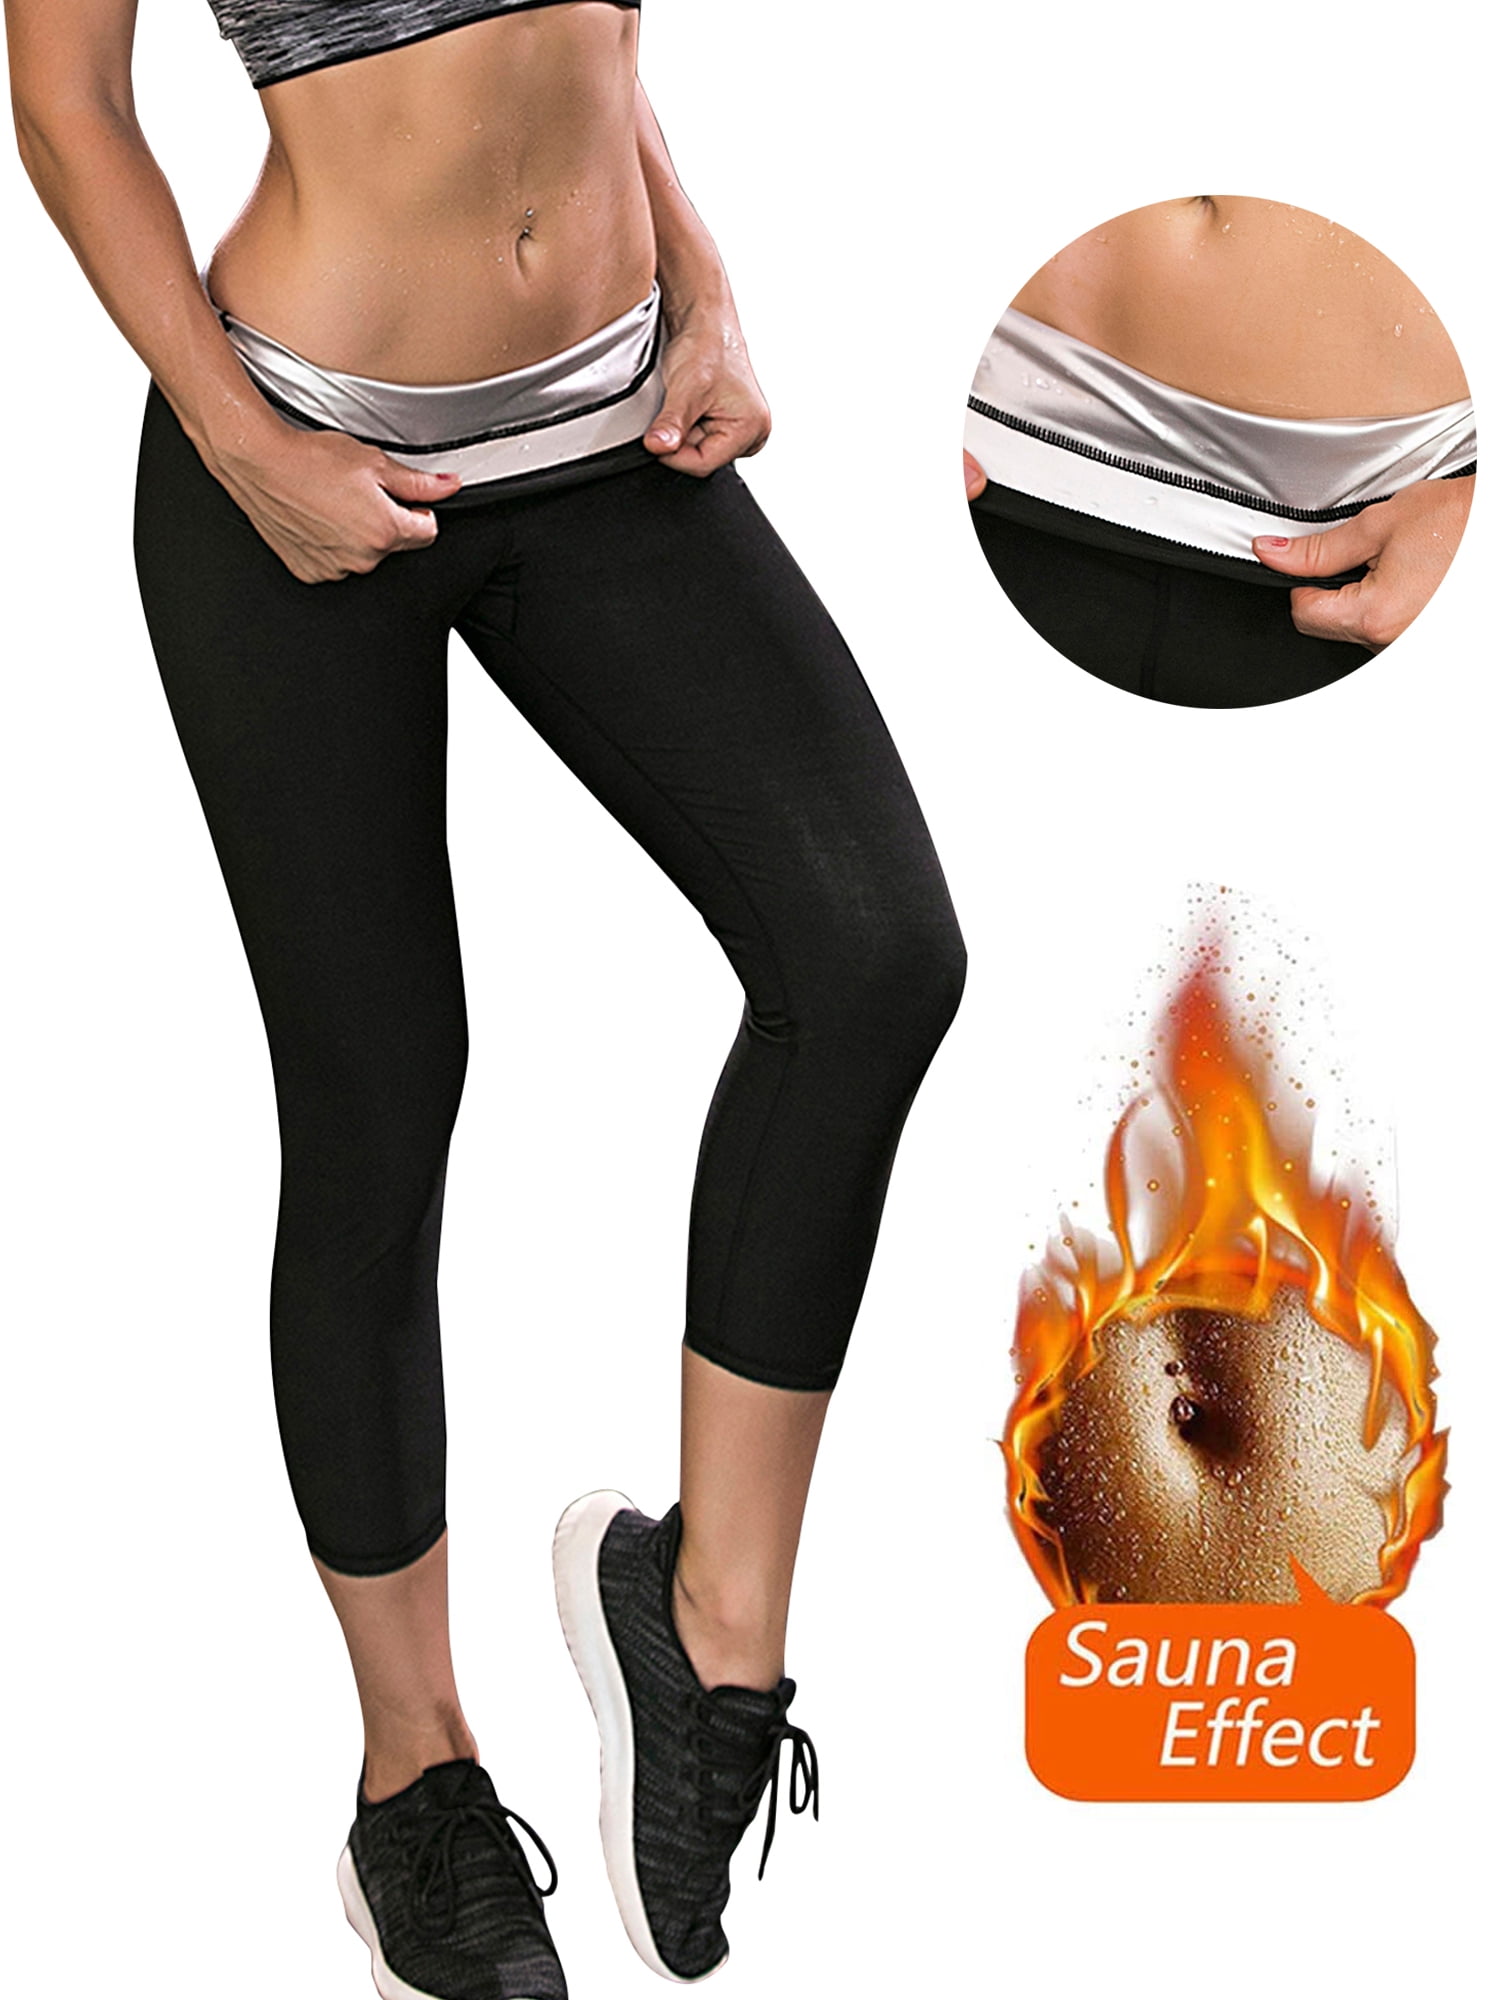 YSMANGO Women Sauna Sweat Pants Compressing Workout Fitness Exercise Tights Body Shaper High Waist Slimming Shorts 